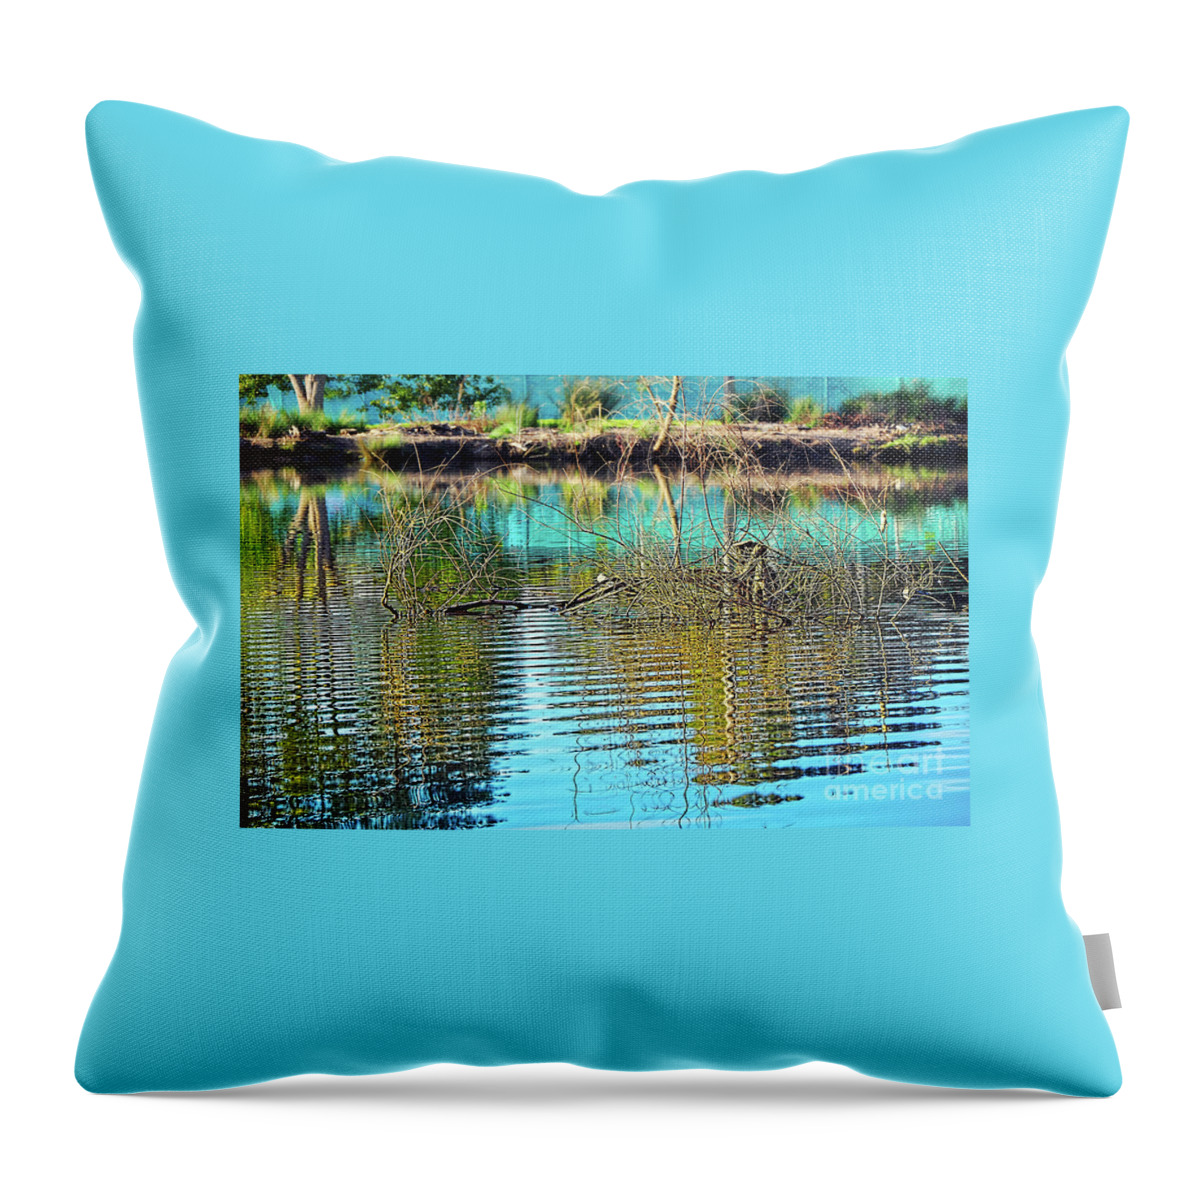 Little Ripples Throw Pillow featuring the photograph Little Ripples by Kaye Menner by Kaye Menner